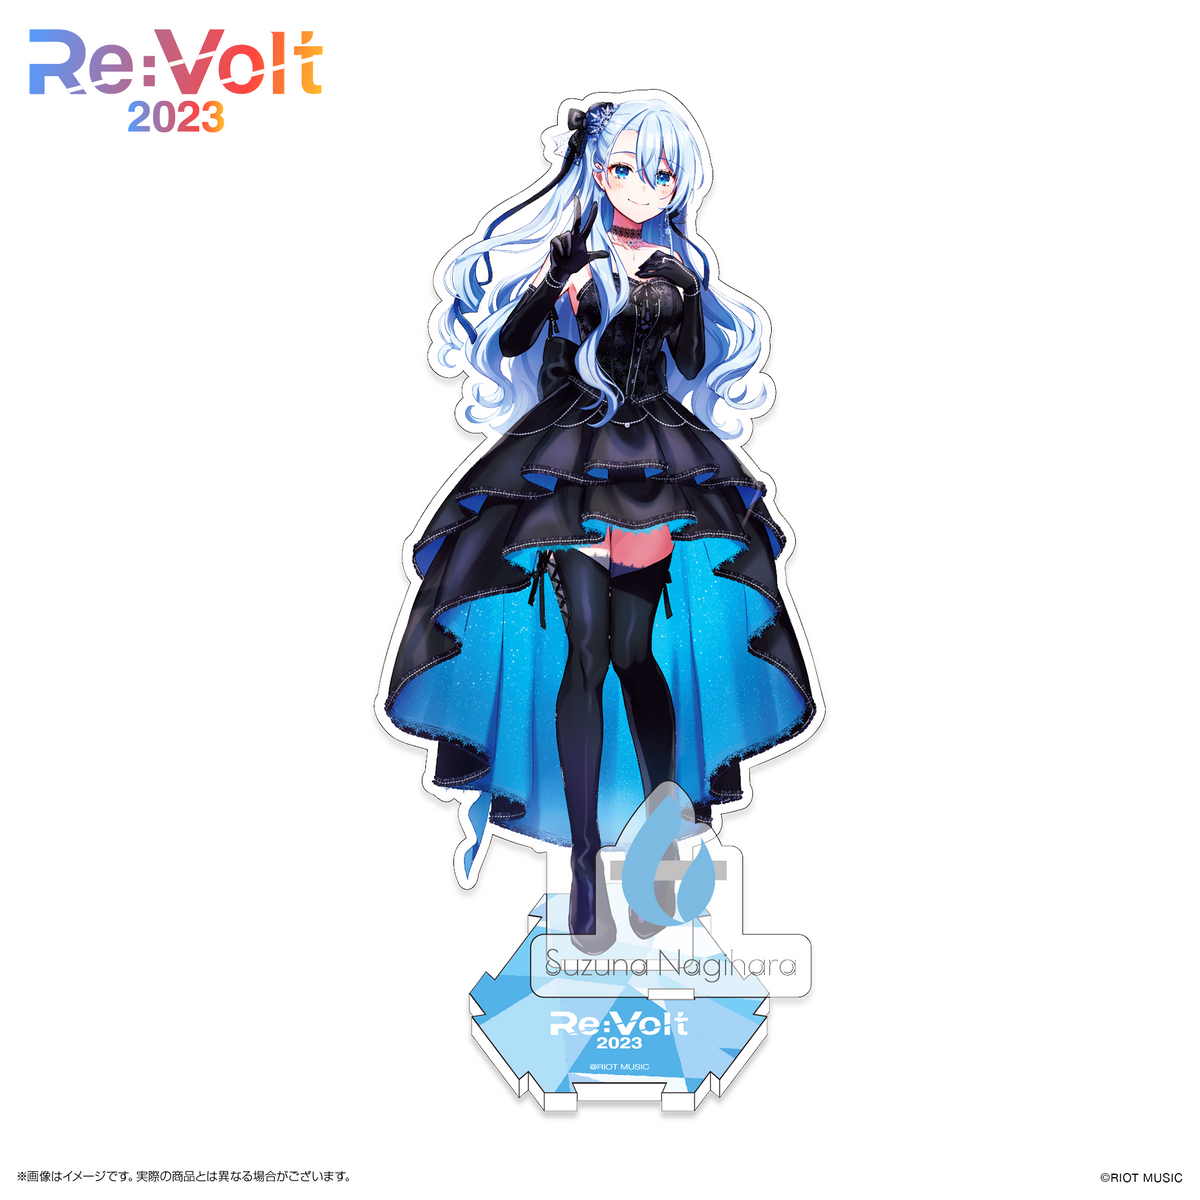 Re:Volt 2023 アクリルスタンド 凪原涼菜 – RIOT MUSIC OFFICIAL STORE